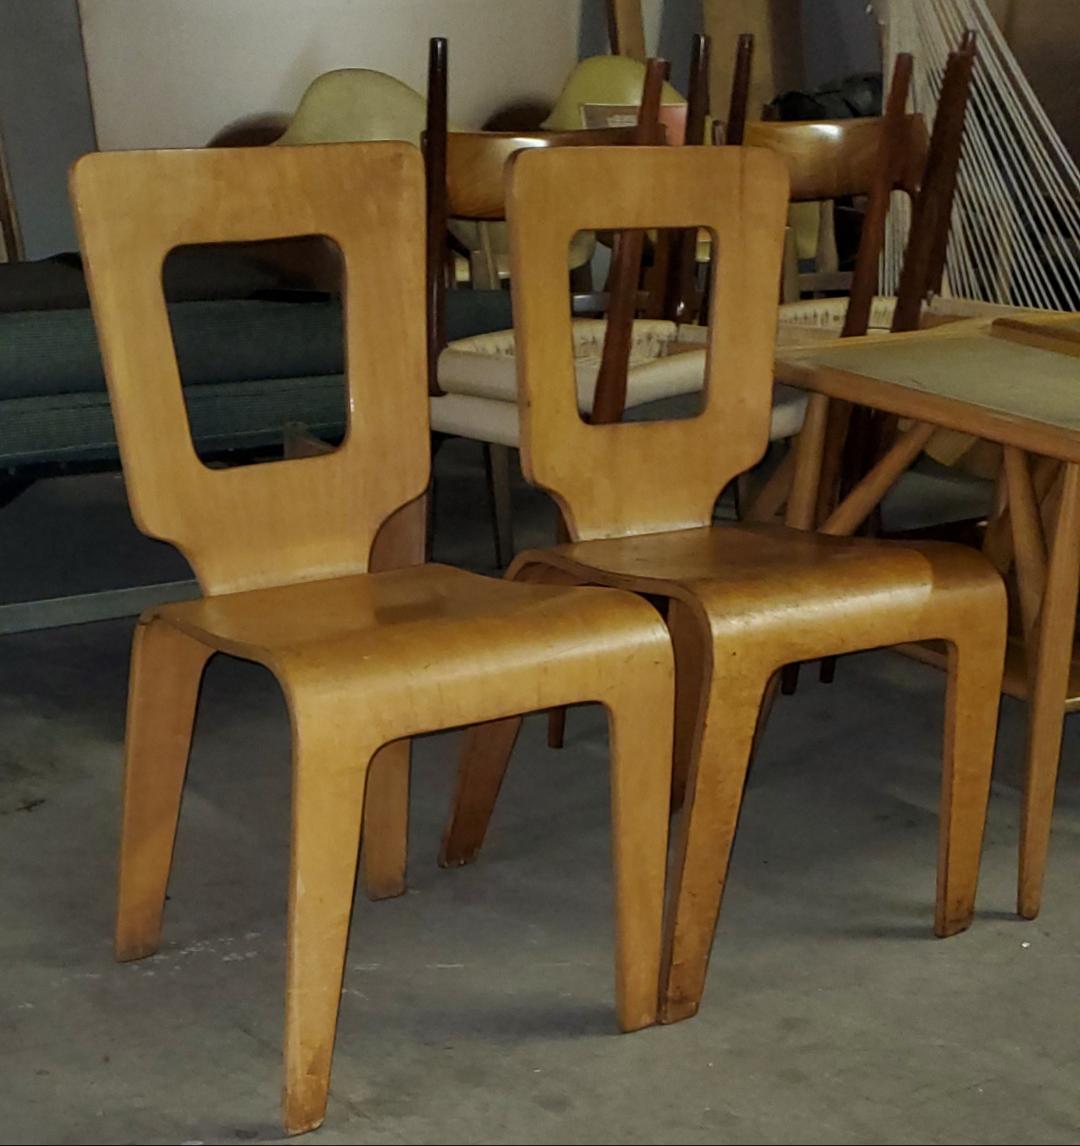 2 1940s Mid Century Modern Molded Plywood Dining Chairs Made In The USA, Also Know As The Model 102 Chairs.
Herbert von Thaden and Donald Lewis Jordan The Designing Duo Of T/J Molded Plywood Furniture Company Of The 1940s.
These Dining Chairs Are